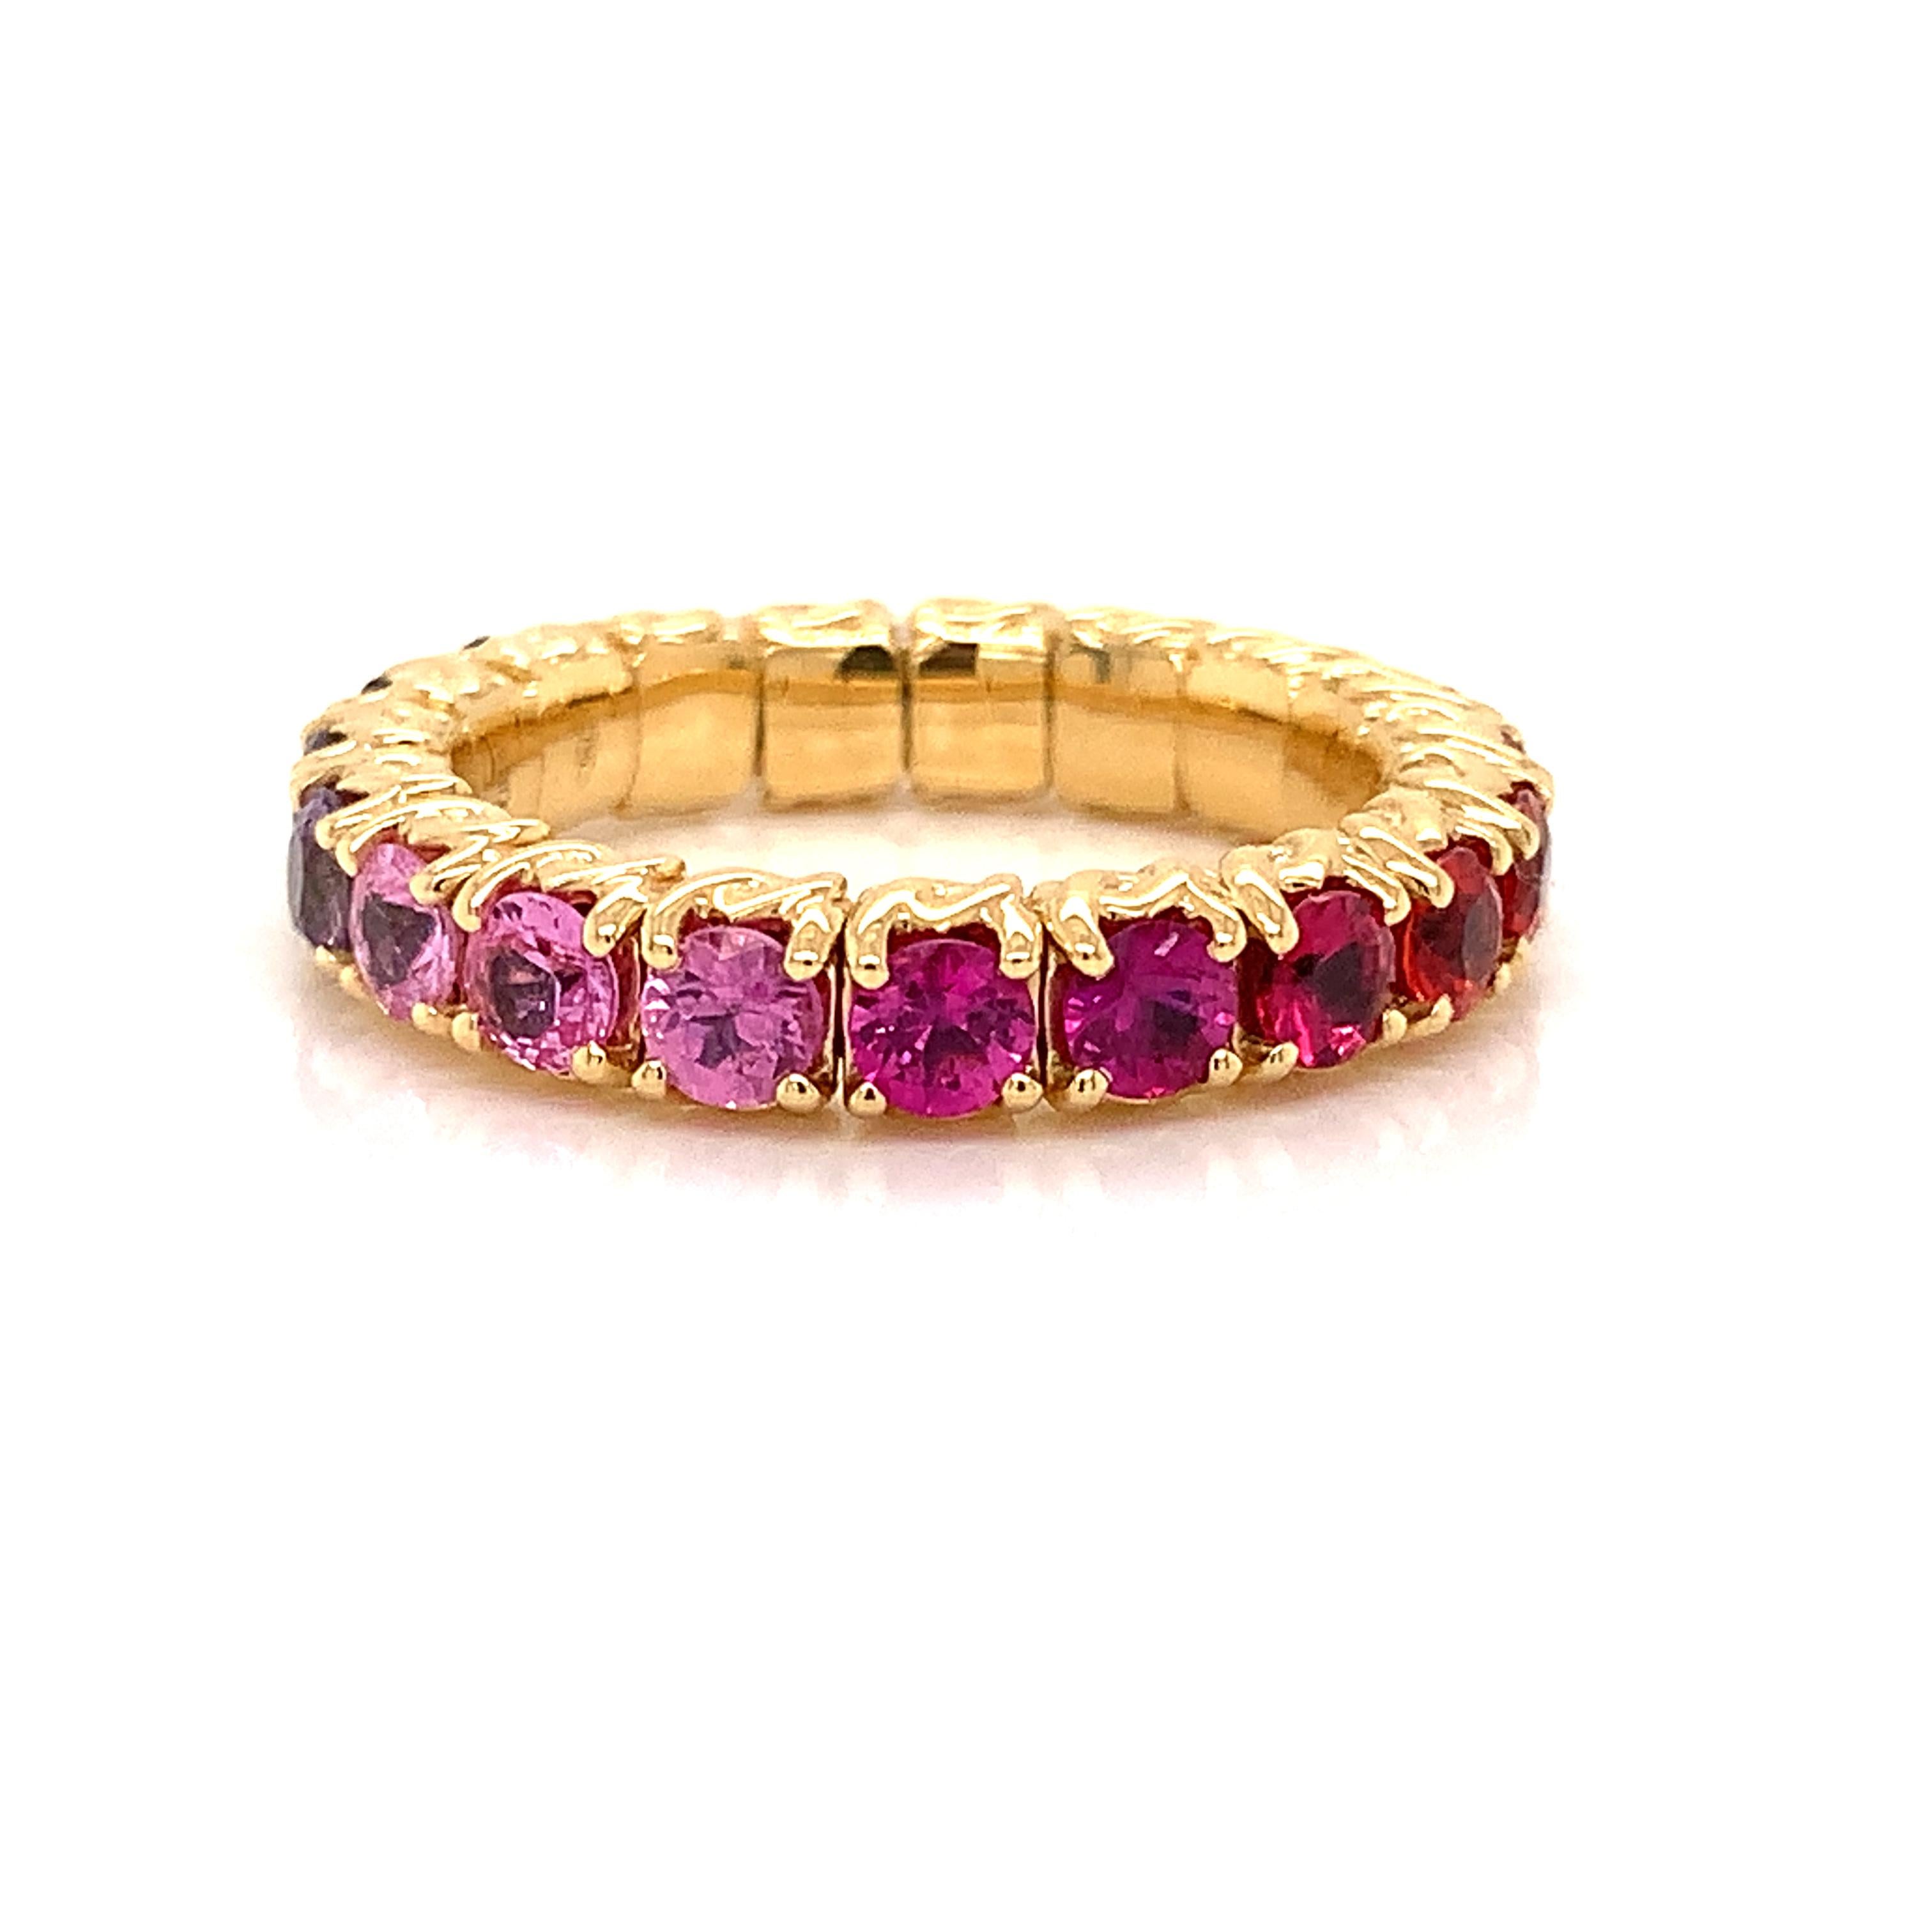 Contemporary 18 Karat Yellow Gold Stretchy Ring with Multicolor Sapphires